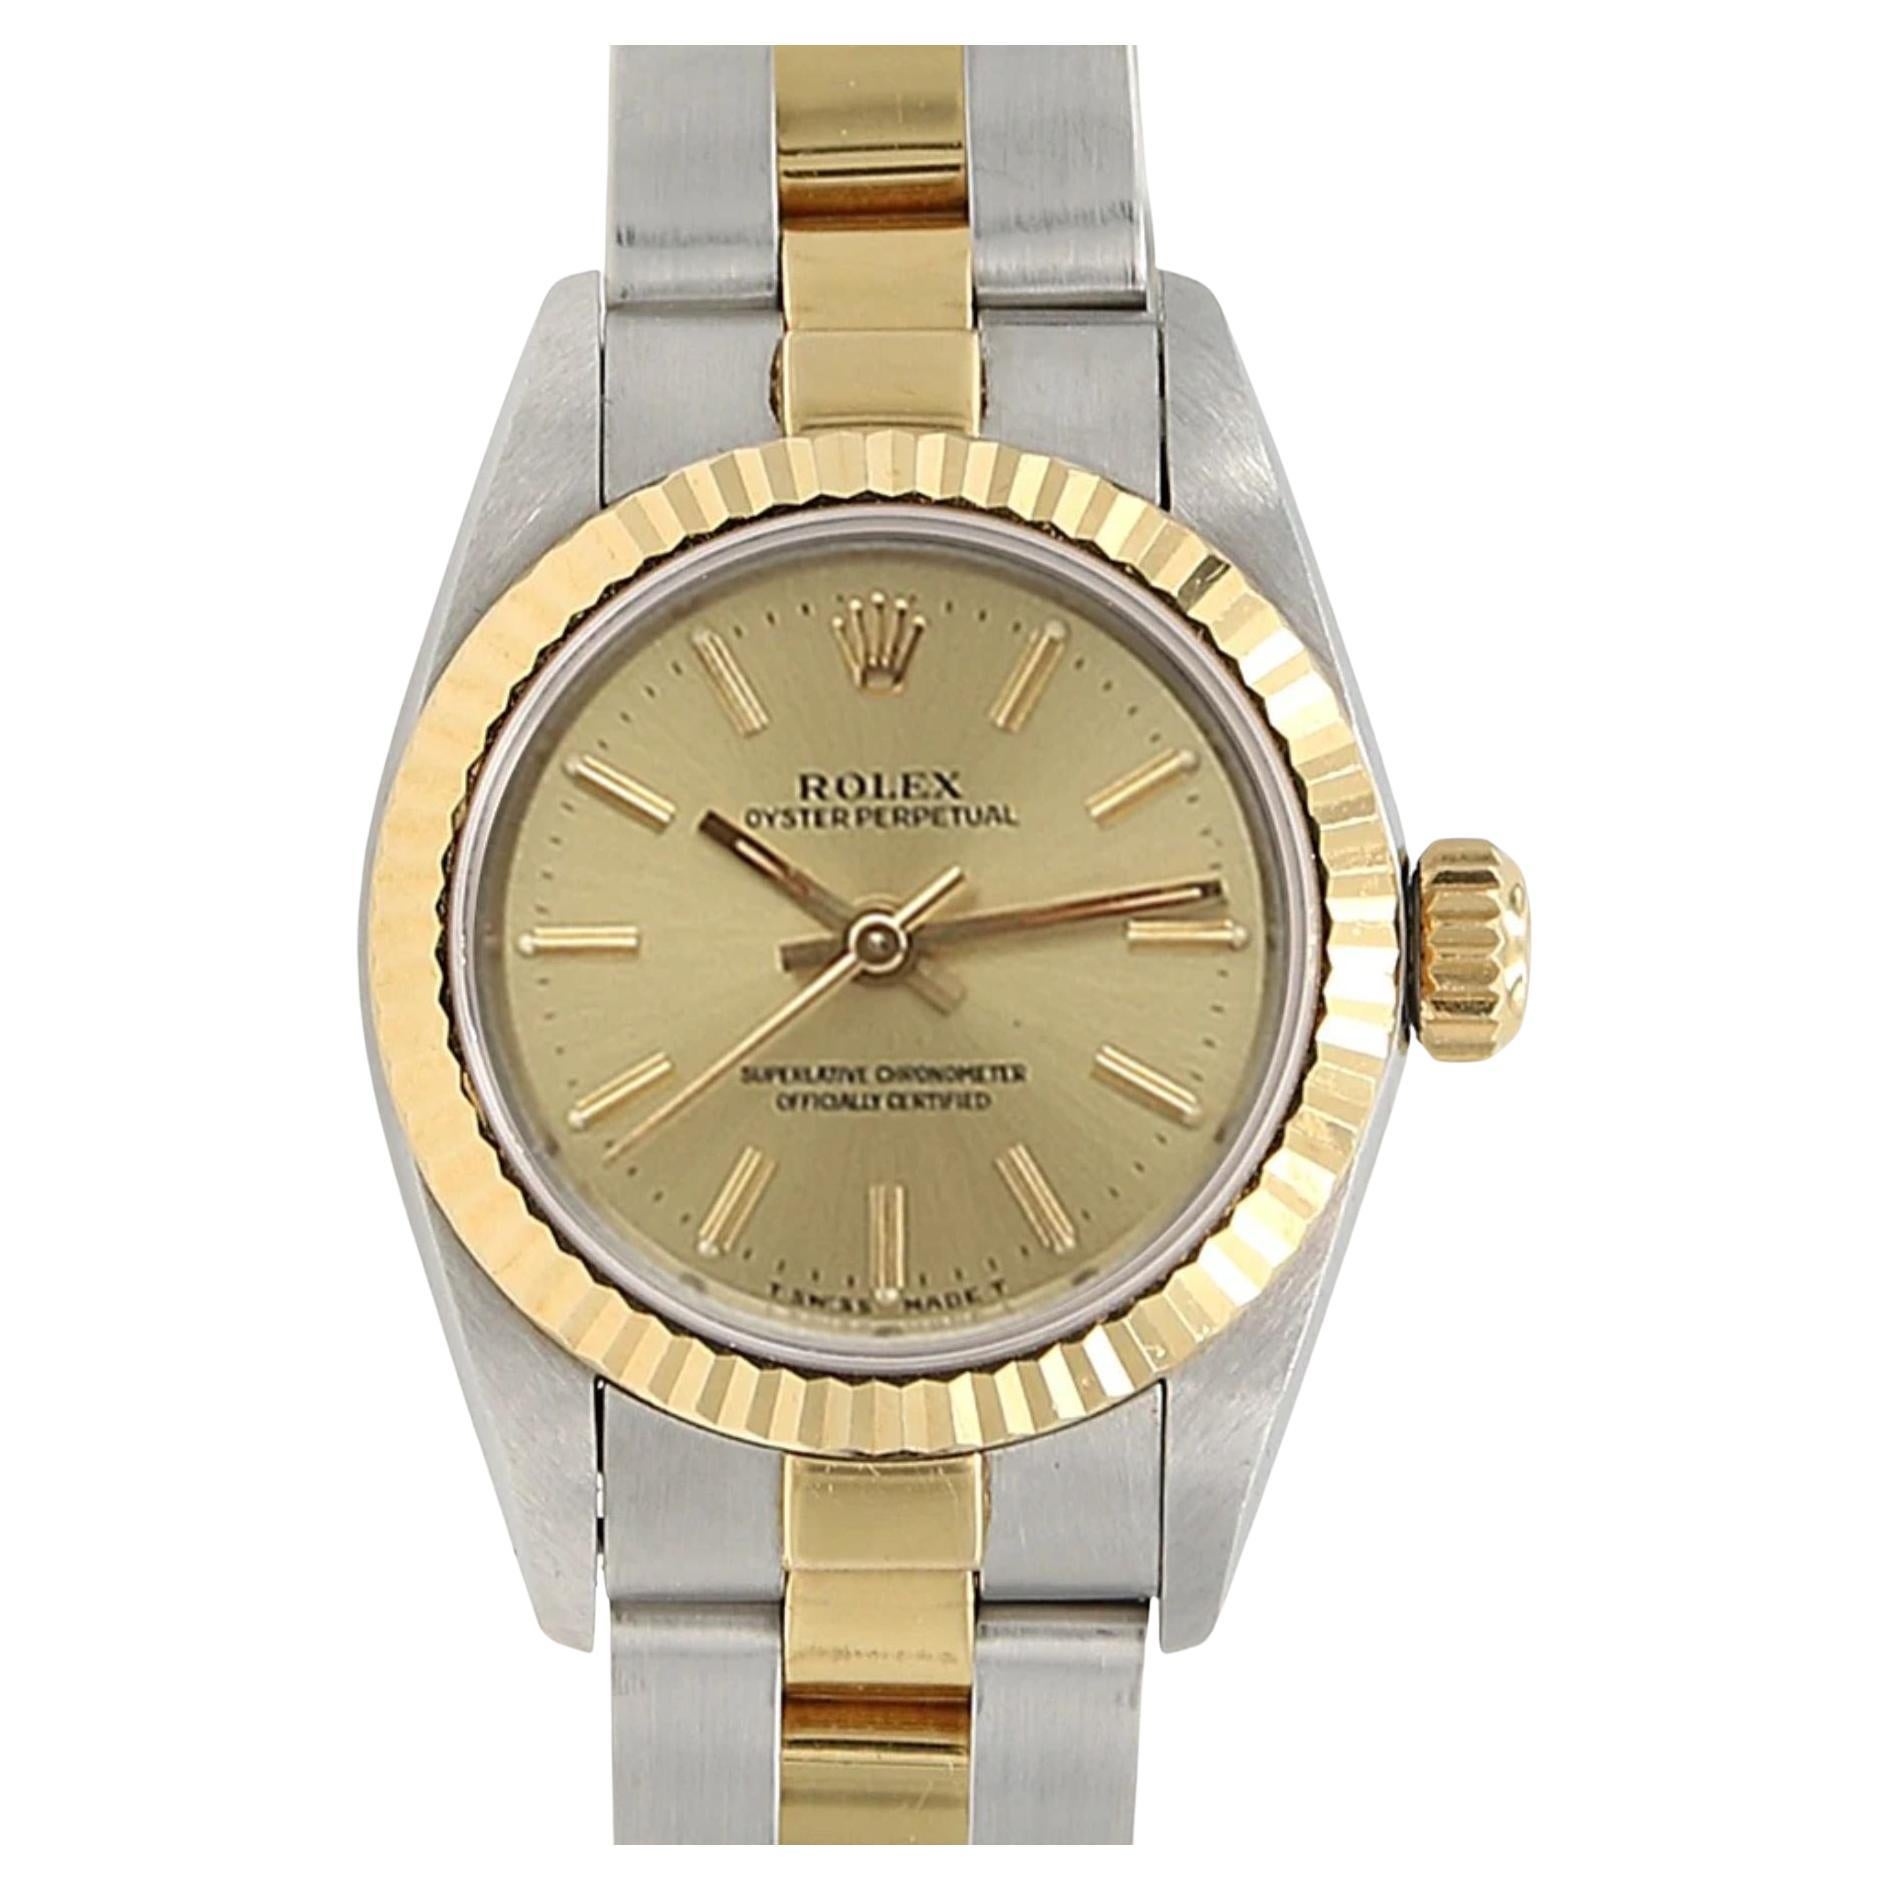 Rolex Oyster Perpetual 67193 Lady - Champagne Dial, Steel/Gold, Oyster Bracelet